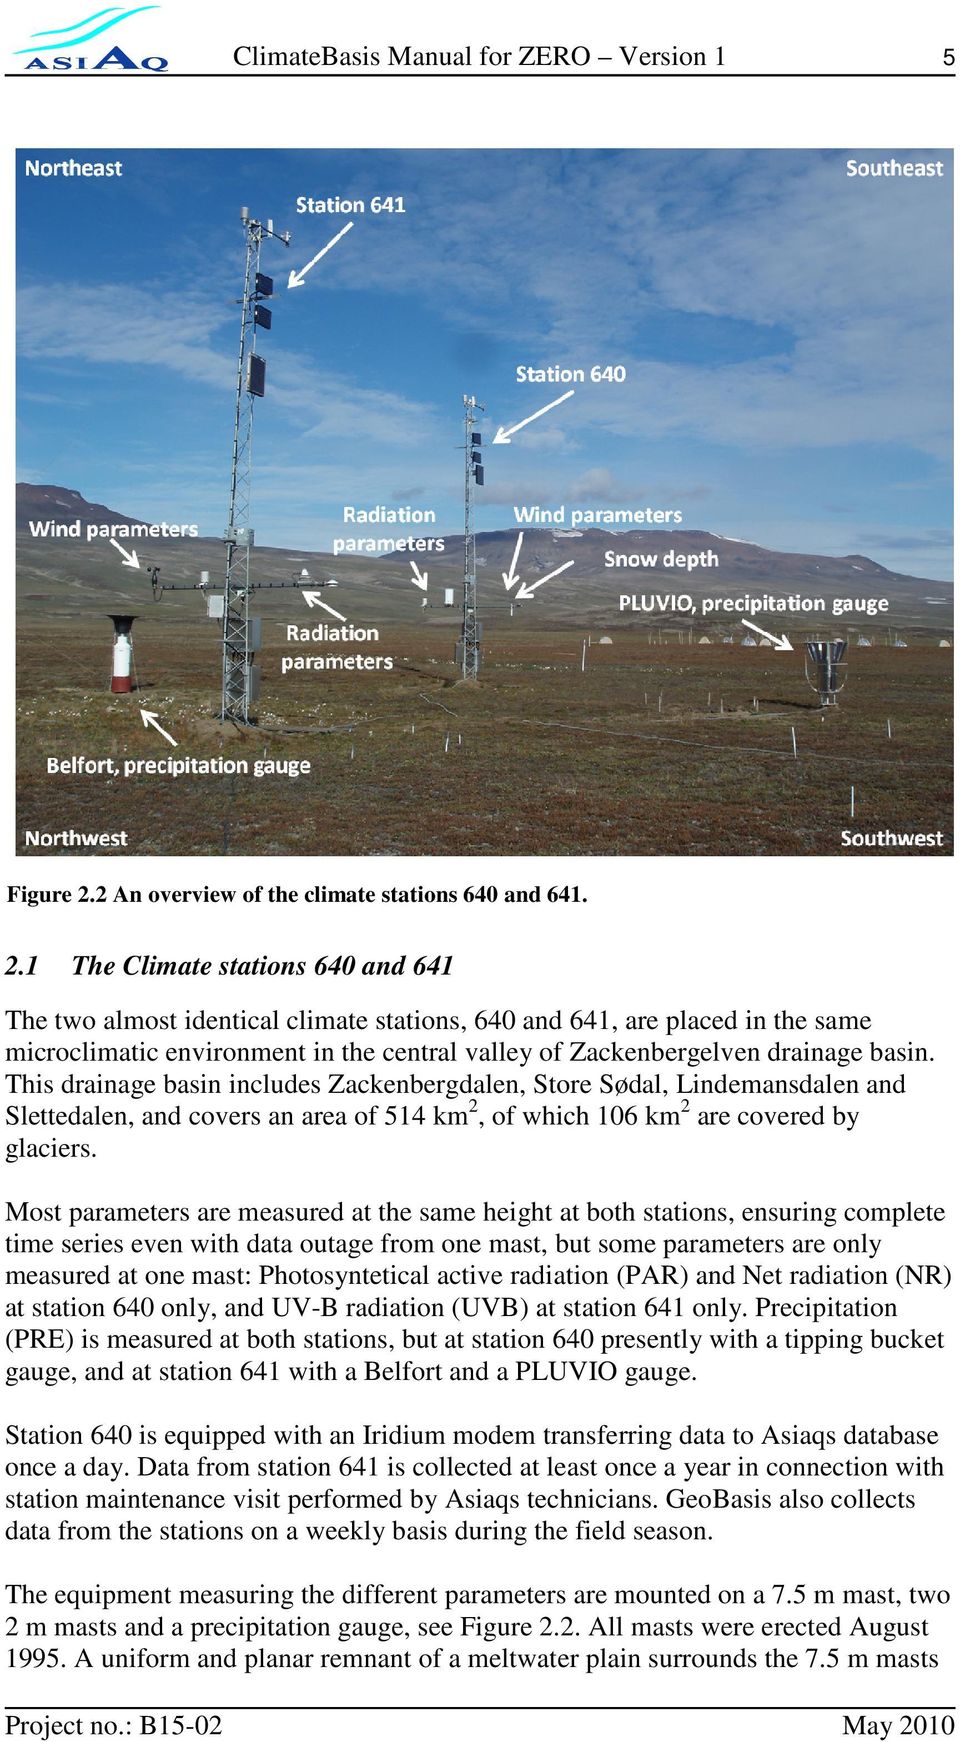 1 The Climate stations 64 and 641 The two almost identical climate stations, 64 and 641, are placed in the same microclimatic environment in the central valley of Zackenbergelven drainage basin.